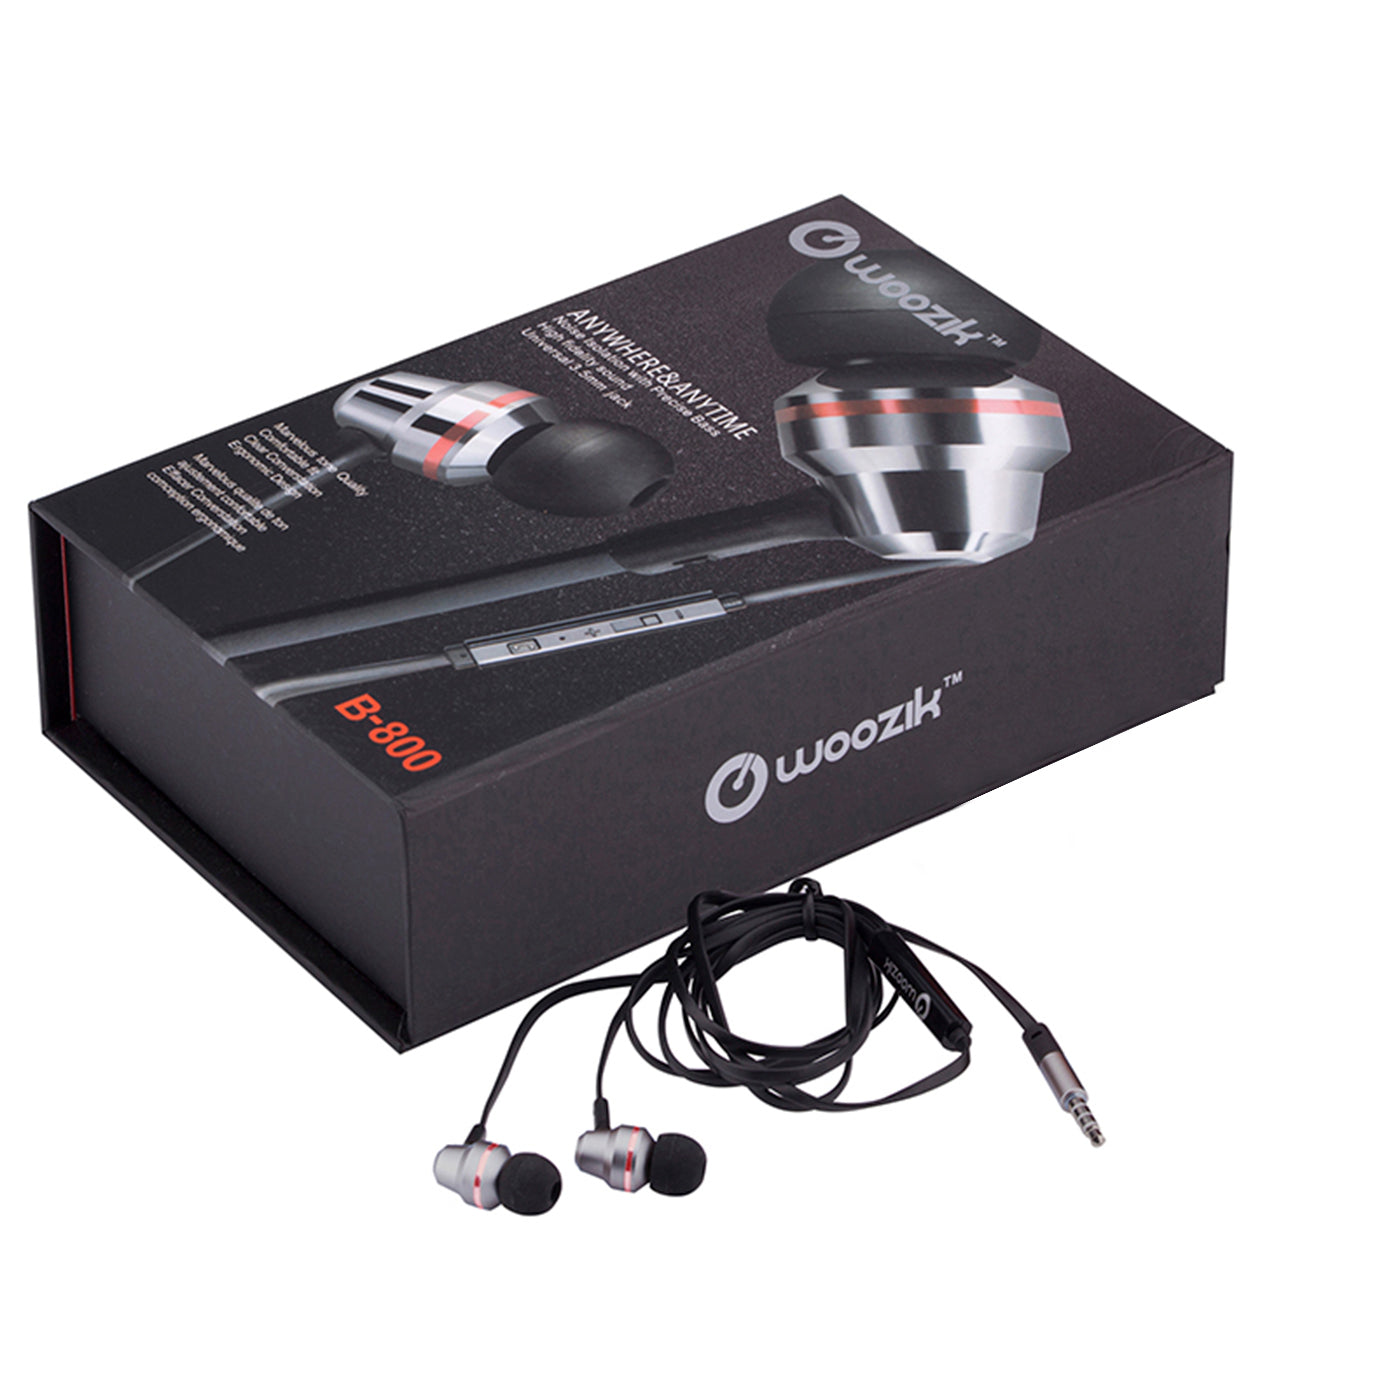 Headphones In-Ear Heavy Bass Noise Isolating With Mic Without Carrying Cases B800 Black Color